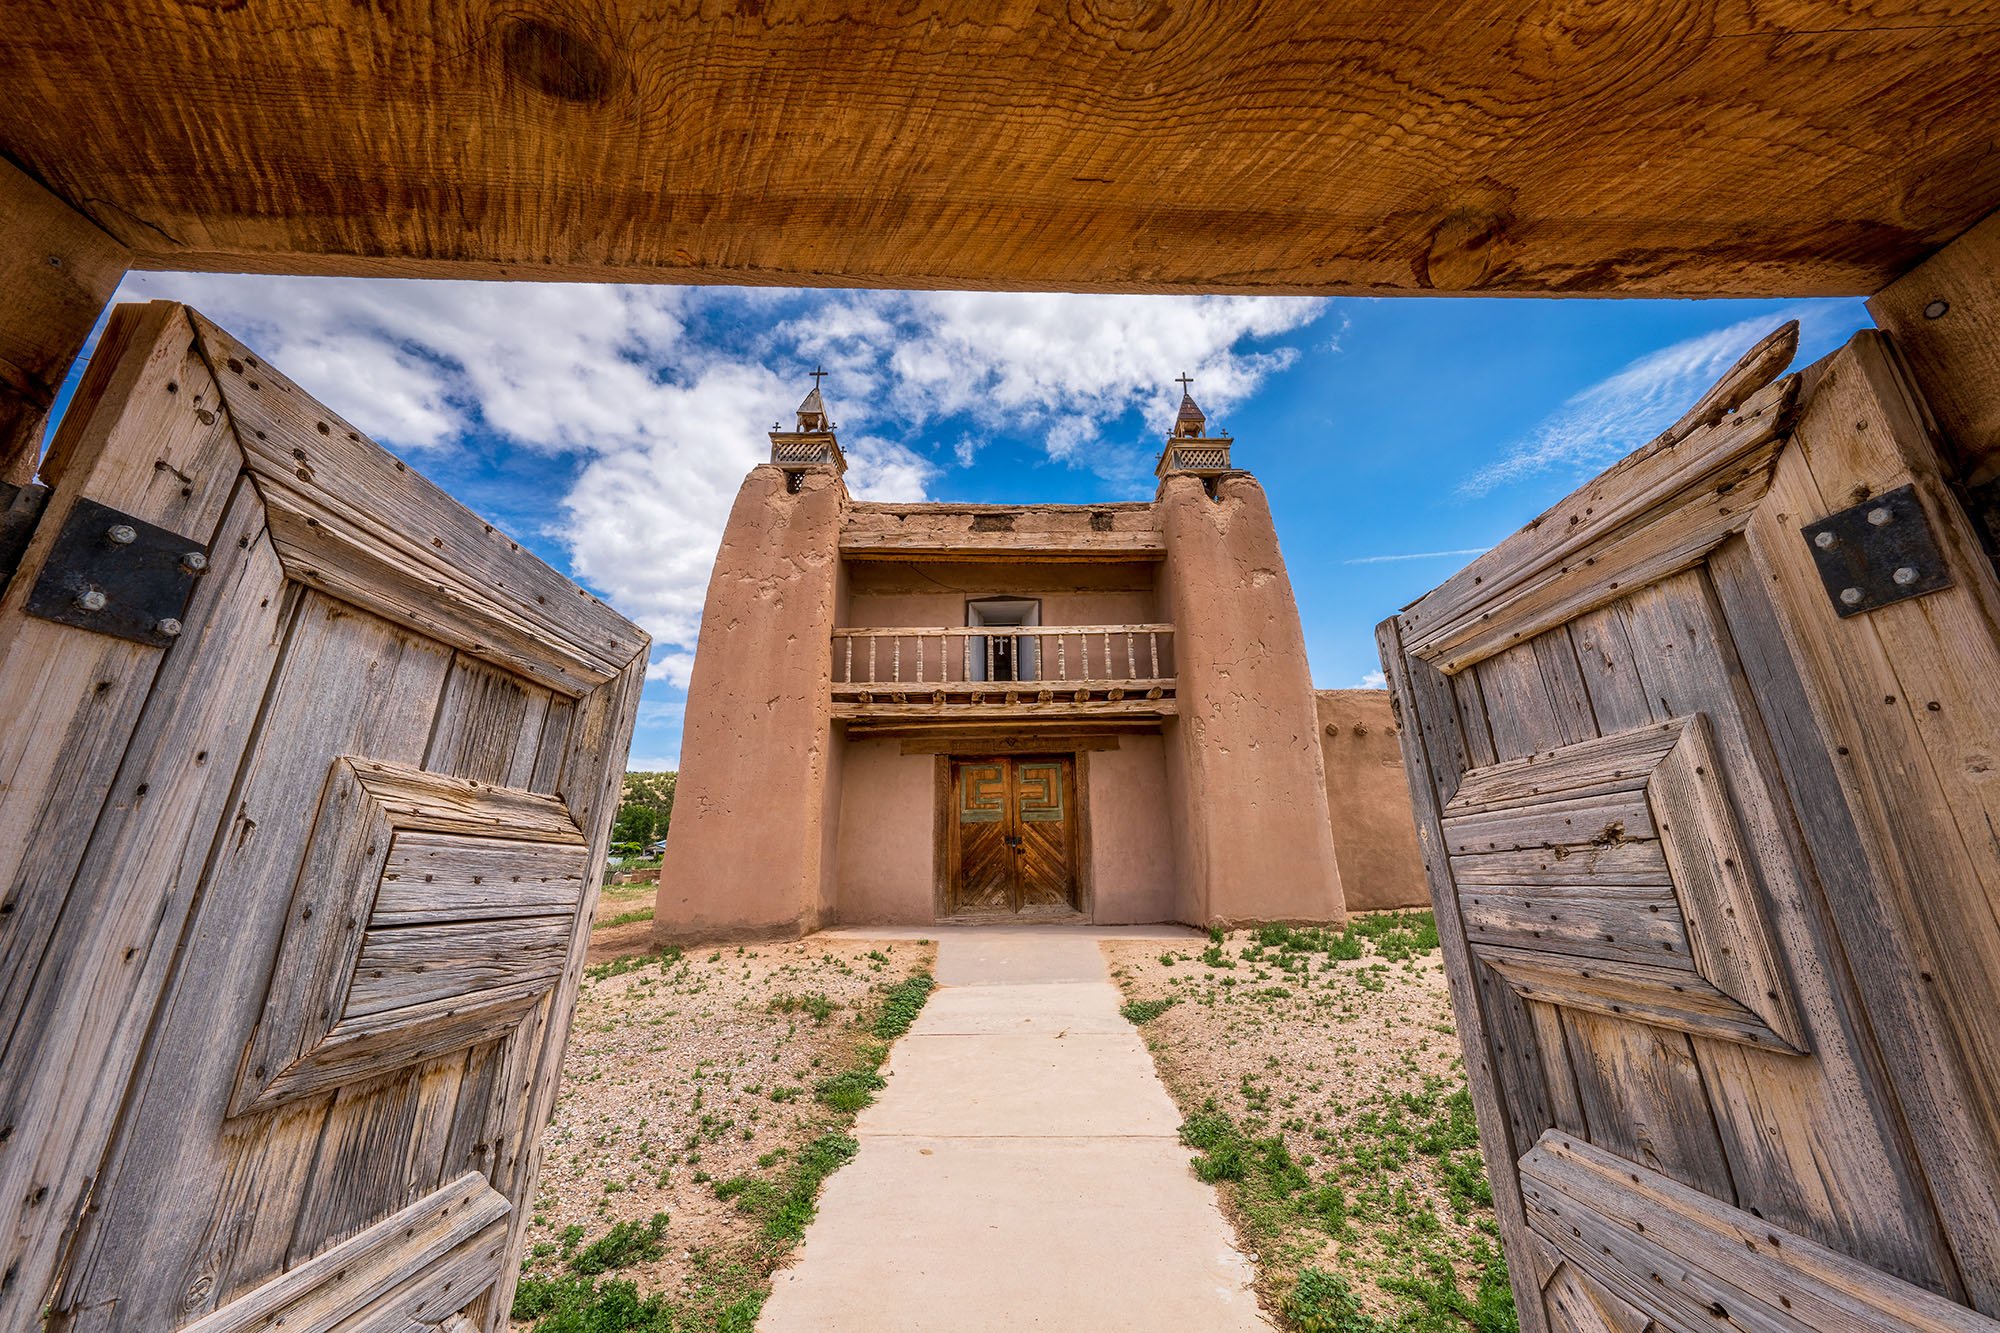 This image, captured in Las Trampas, New Mexico, features the striking San Jose de Gracia Mission Church. The photograph highlights...